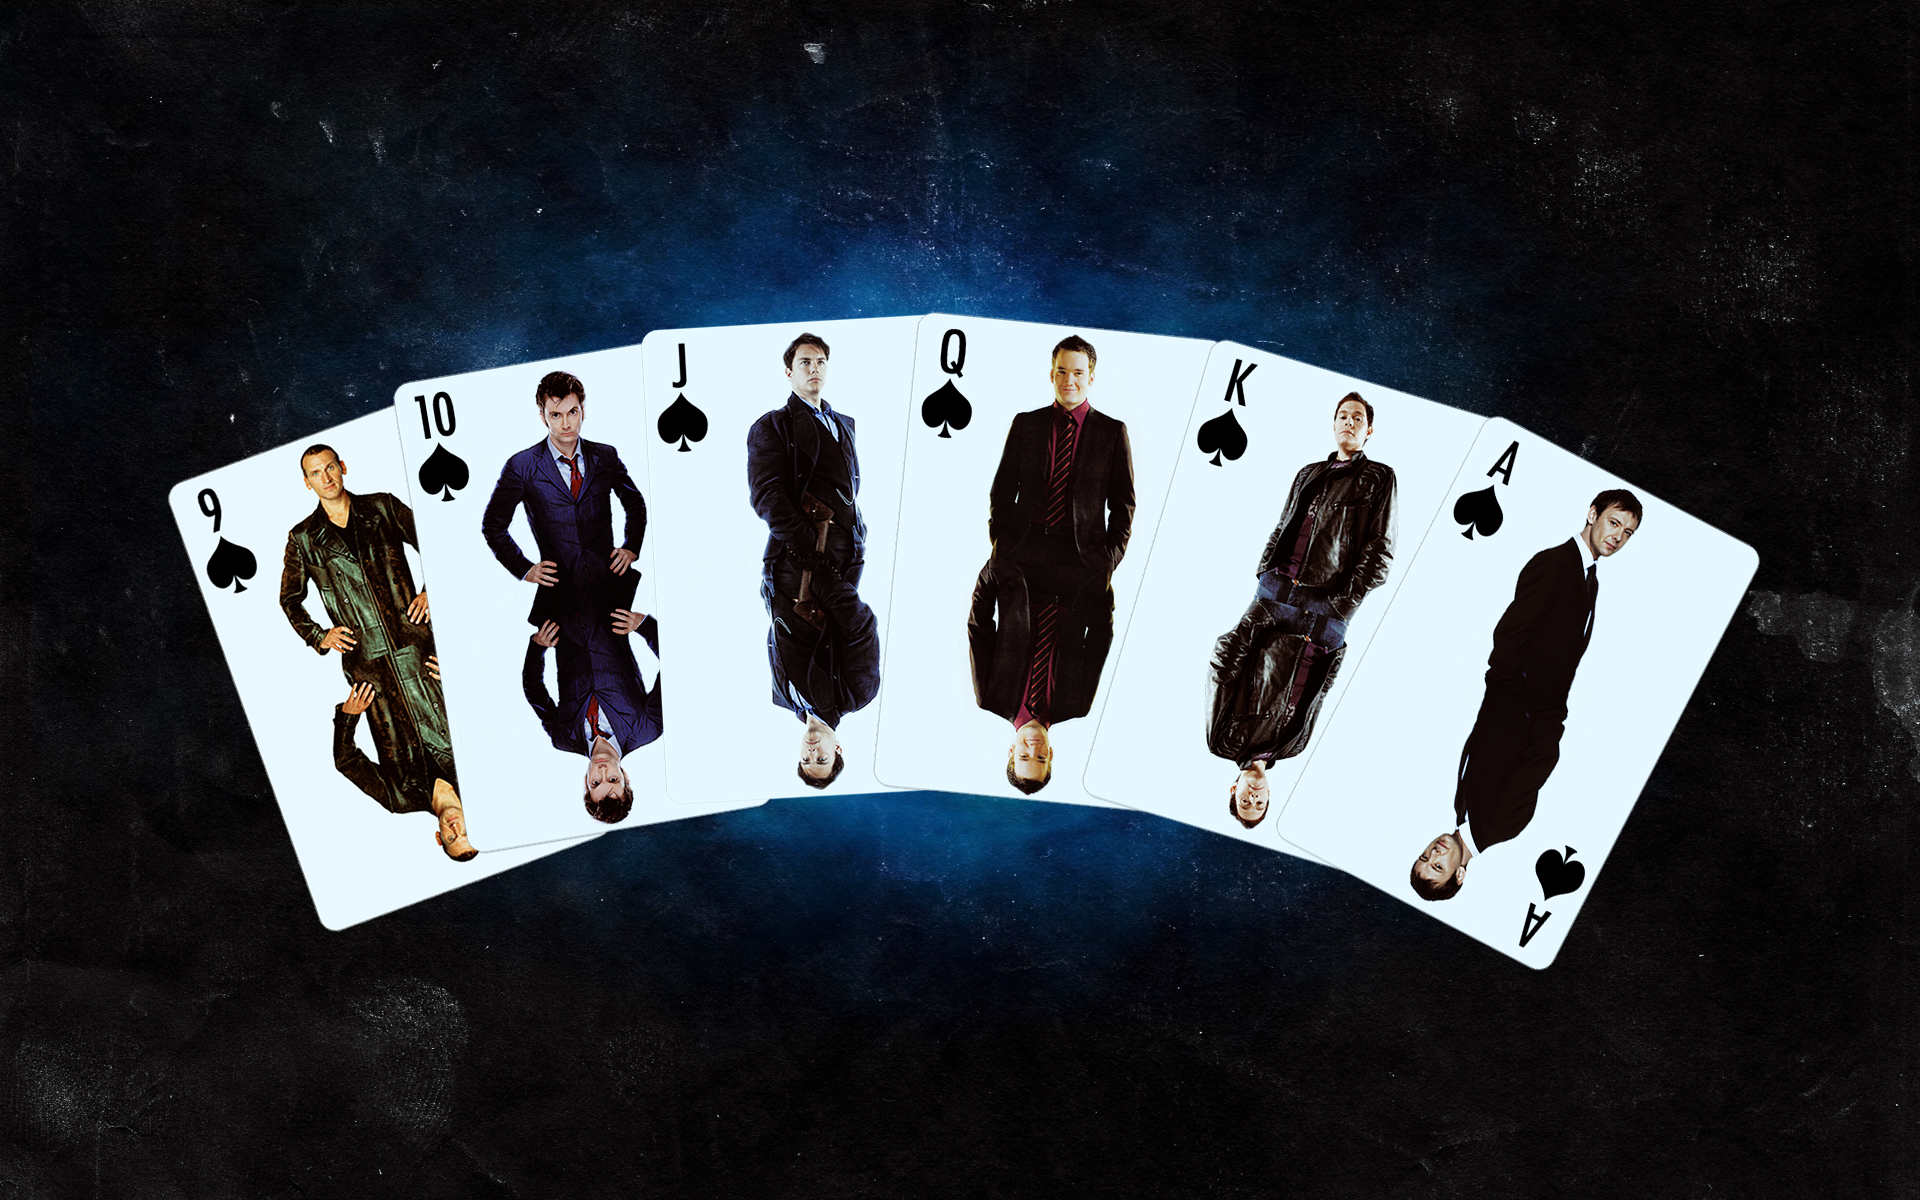 cards, David, Tennant, Torchwood, The, Master, Doctor, Who, John, Simm, Christopher, Eccleston, Tenth, Doctor, Jack, Harkness, Ninth, Doctor Wallpaper